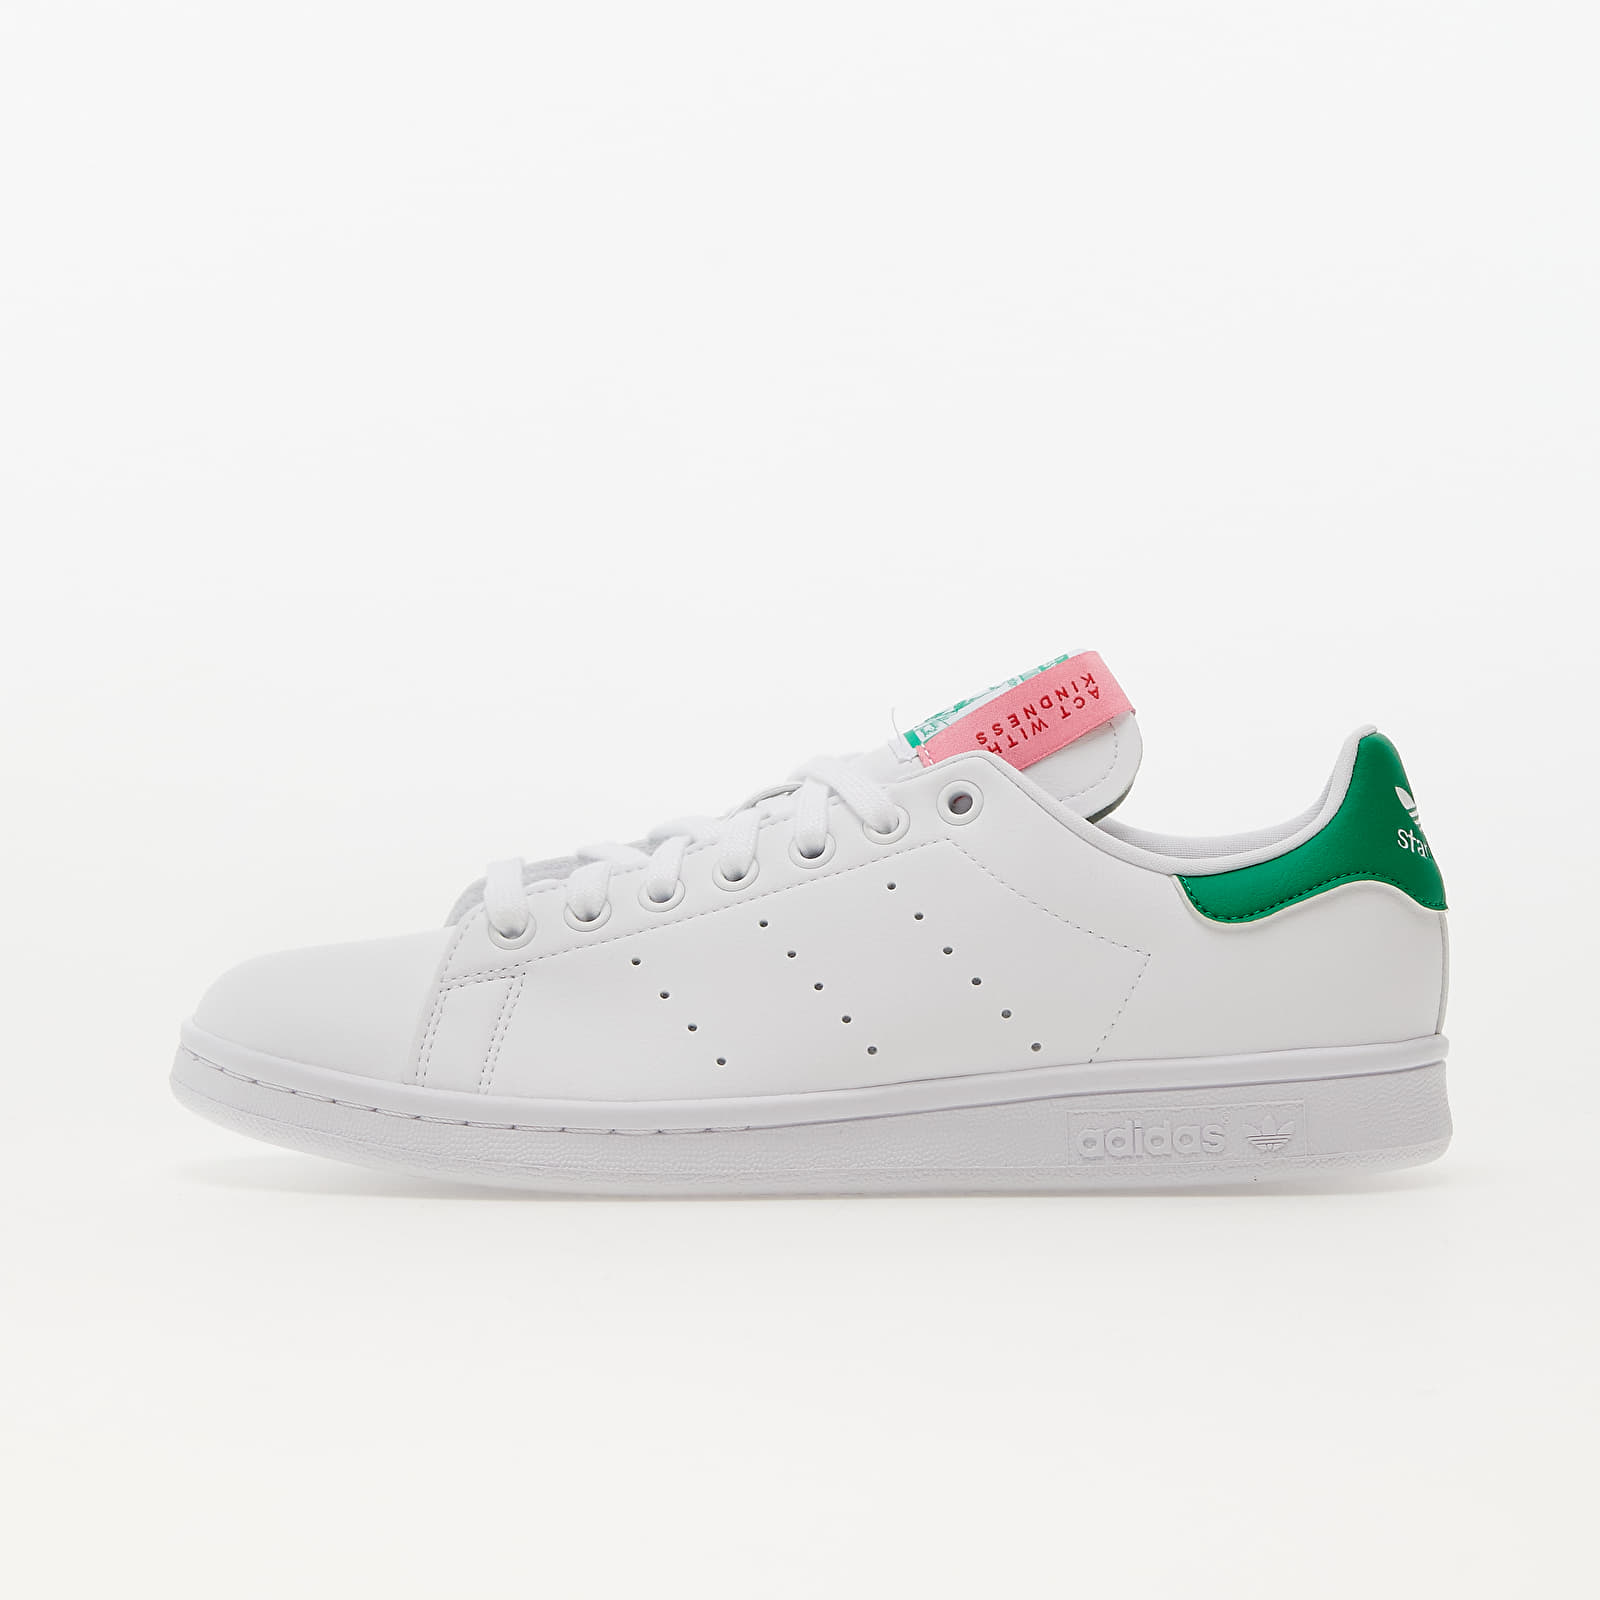 Women's shoes adidas Stan Smith W Ftw White/ Green/ Bliss Pink